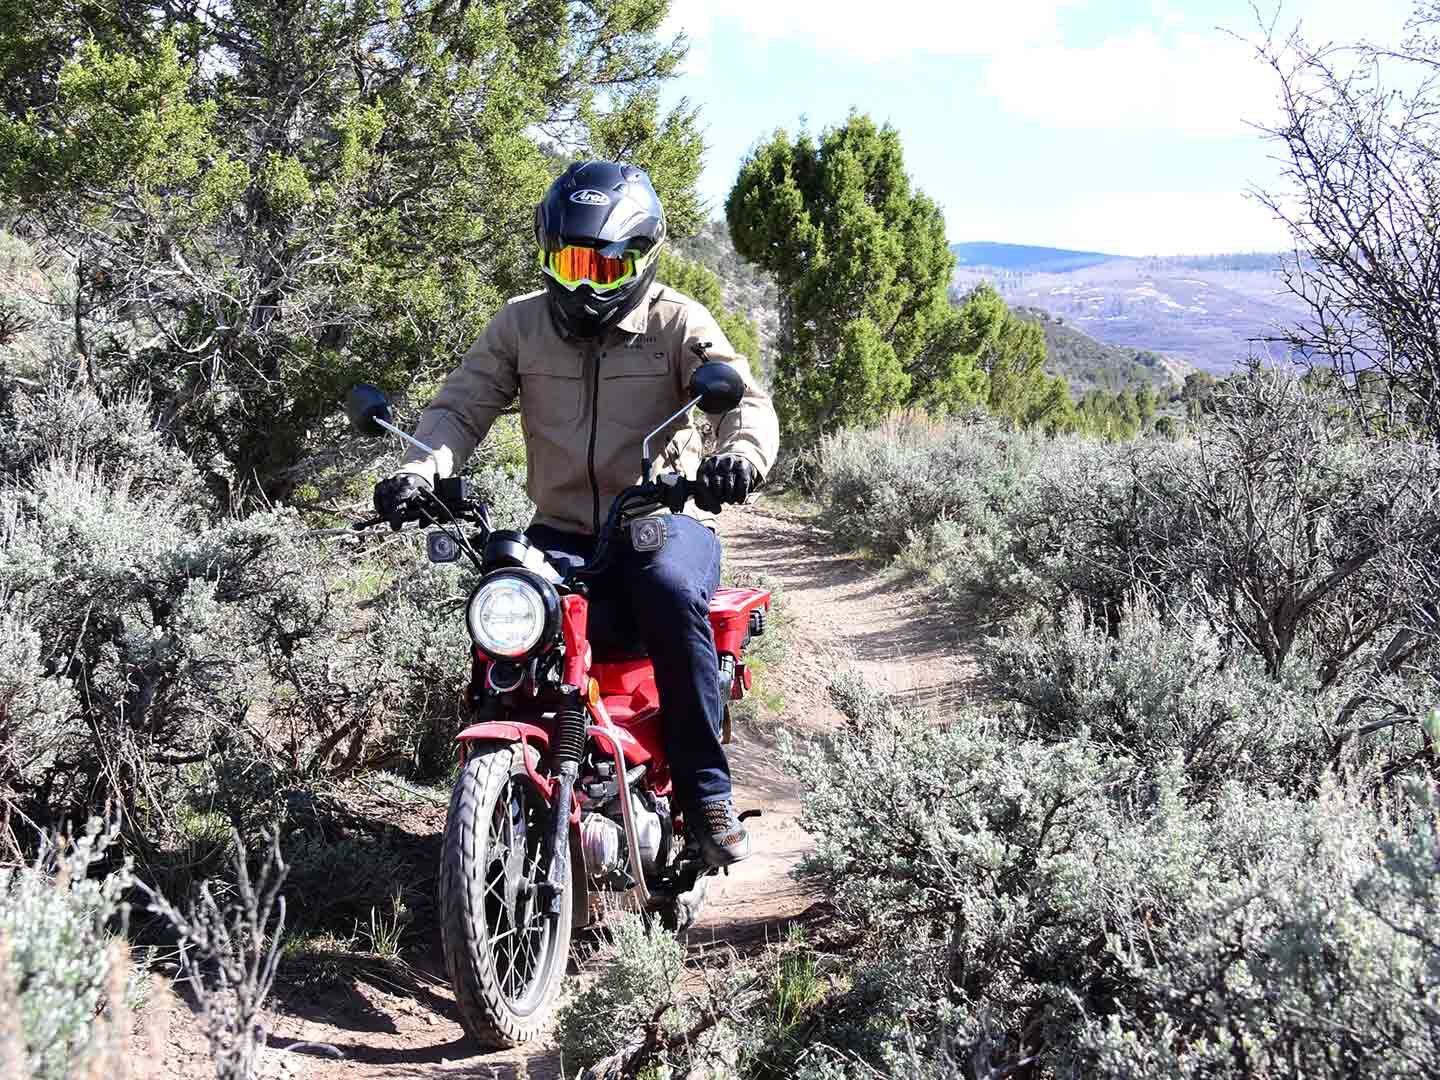 Single-track, double-track, dirt roads, and urban, we rode it all on the Trail125.